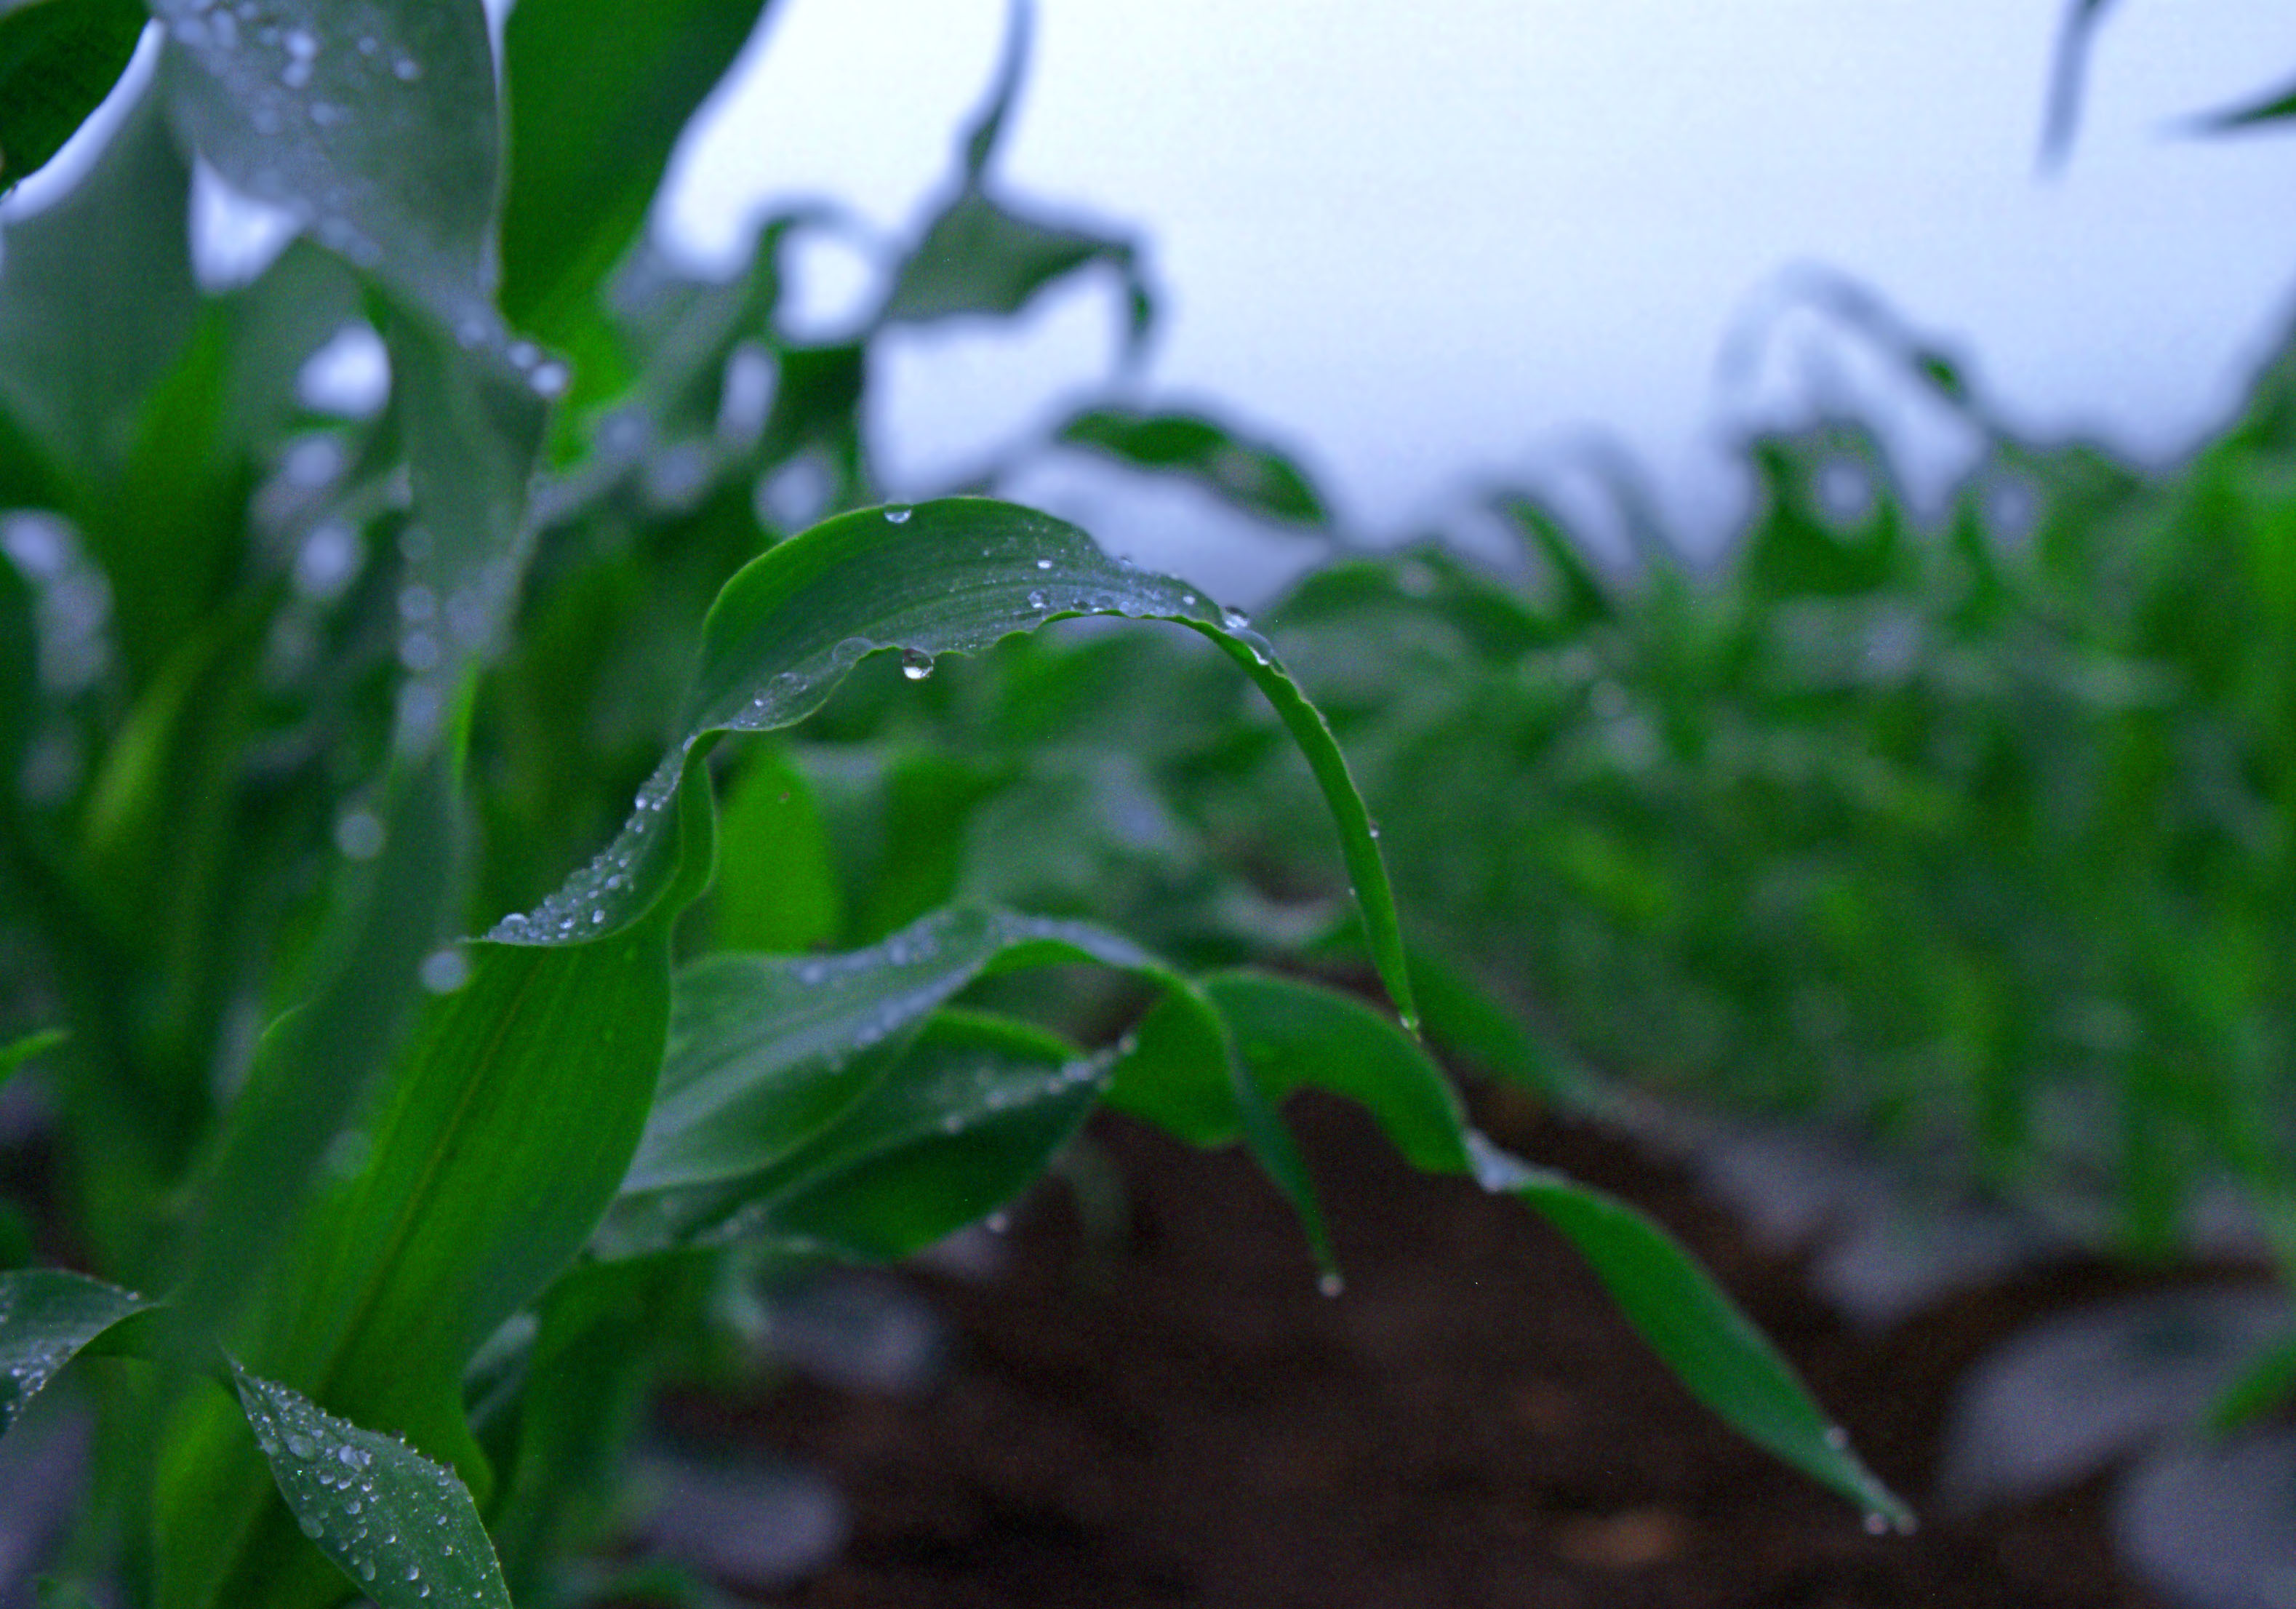 photo,material,free,landscape,picture,stock photo,Creative Commons,Morning cornfield, morning, green, vegetable, 